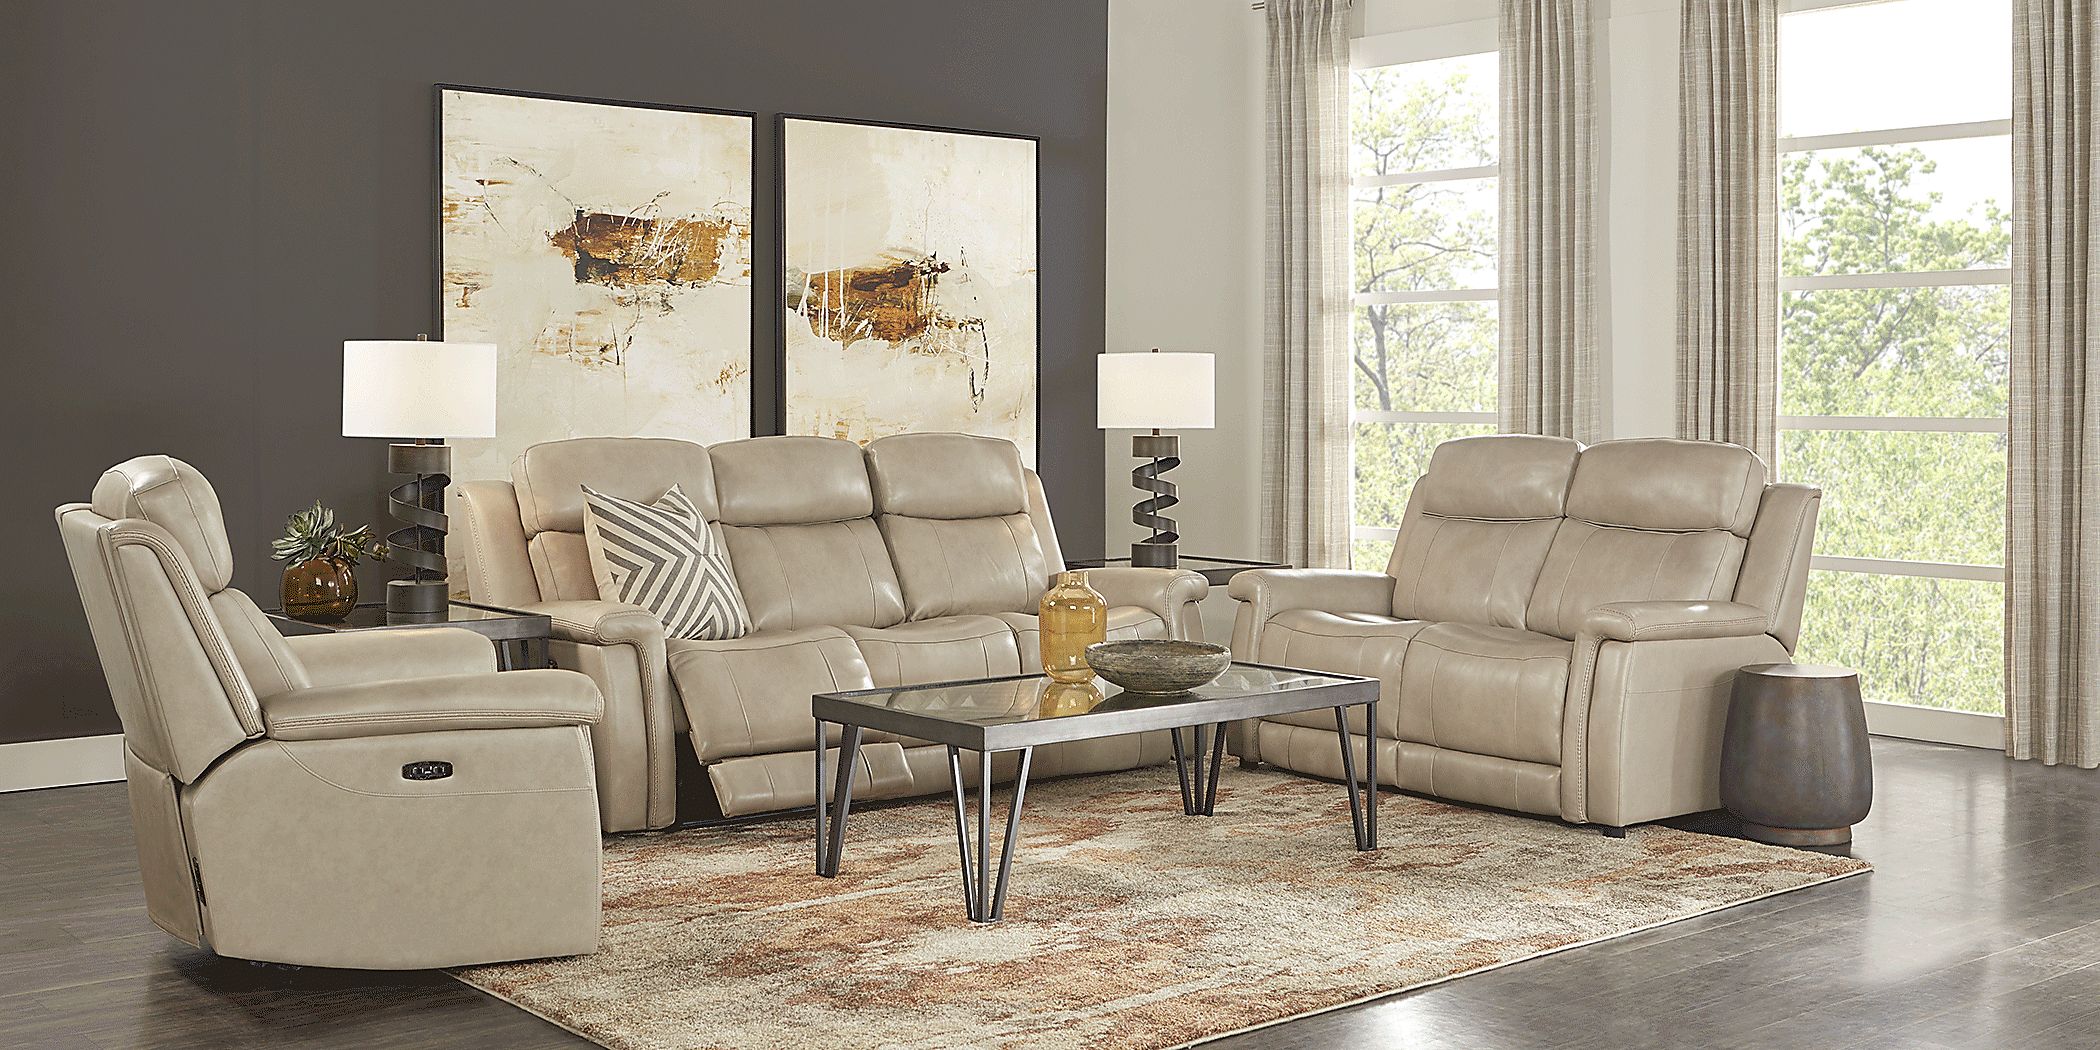 Orsini Beige Leather 7 Pc Living Room with Dual Power Reclining Sofa